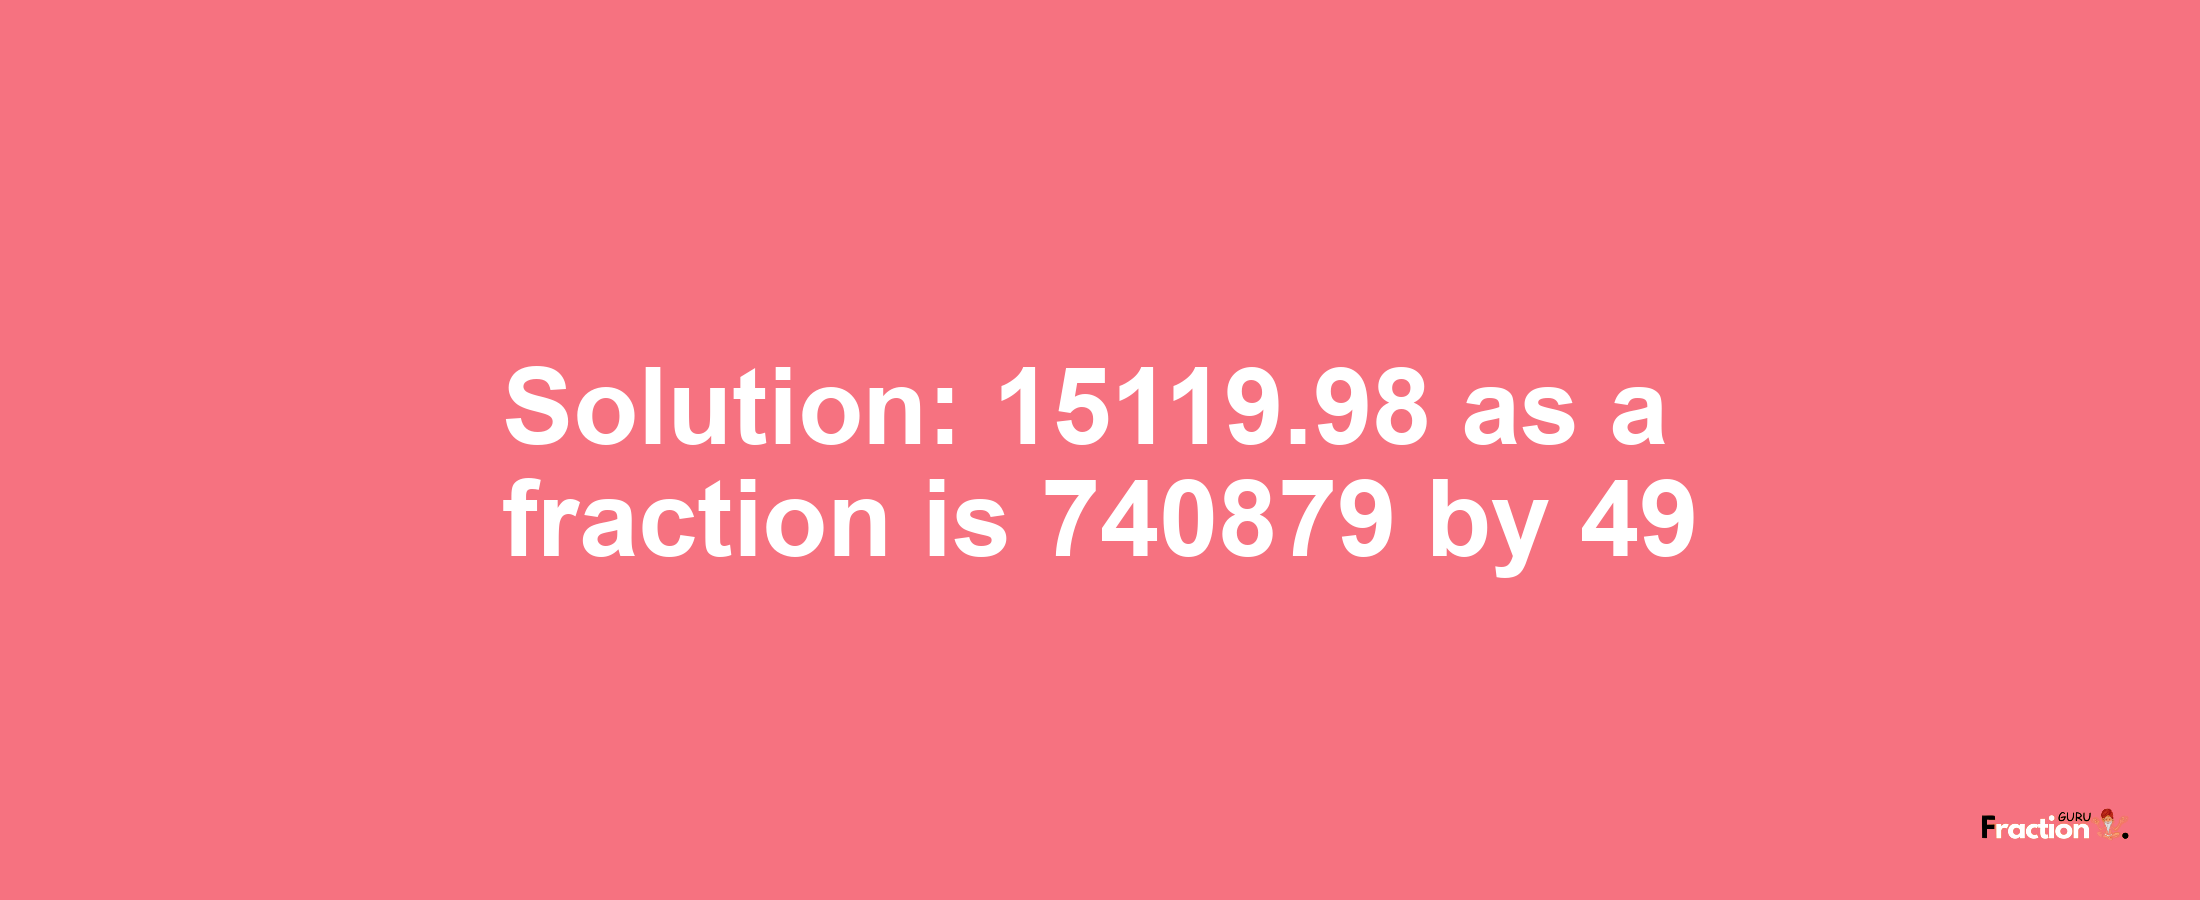 Solution:15119.98 as a fraction is 740879/49